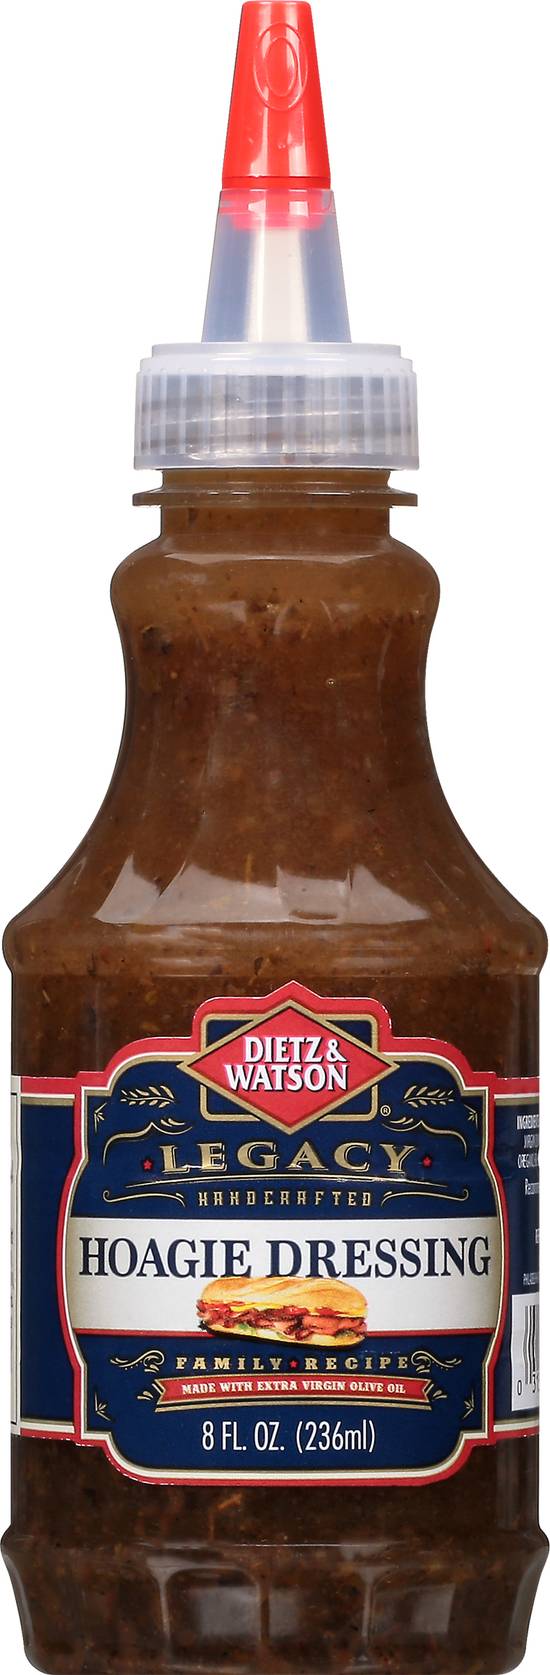 Dietz & Watson Legacy Hoagie Dressing, Delivery Near You